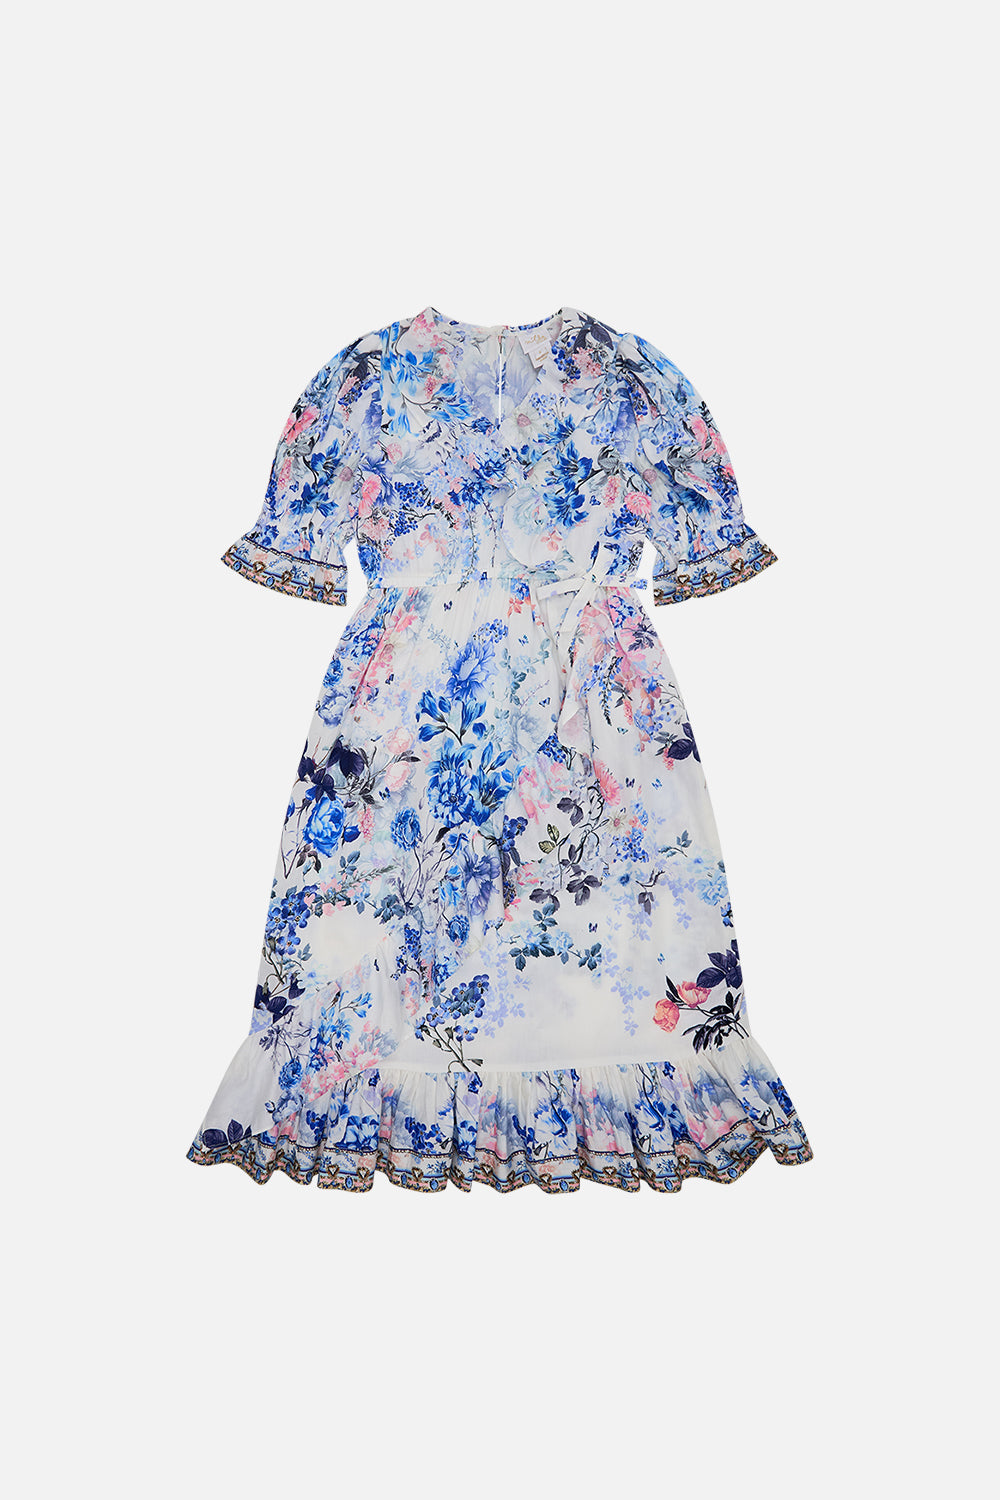 Product view of MILLA BY CAMILLA kids floral wrap dress in Tuscan Moondance print